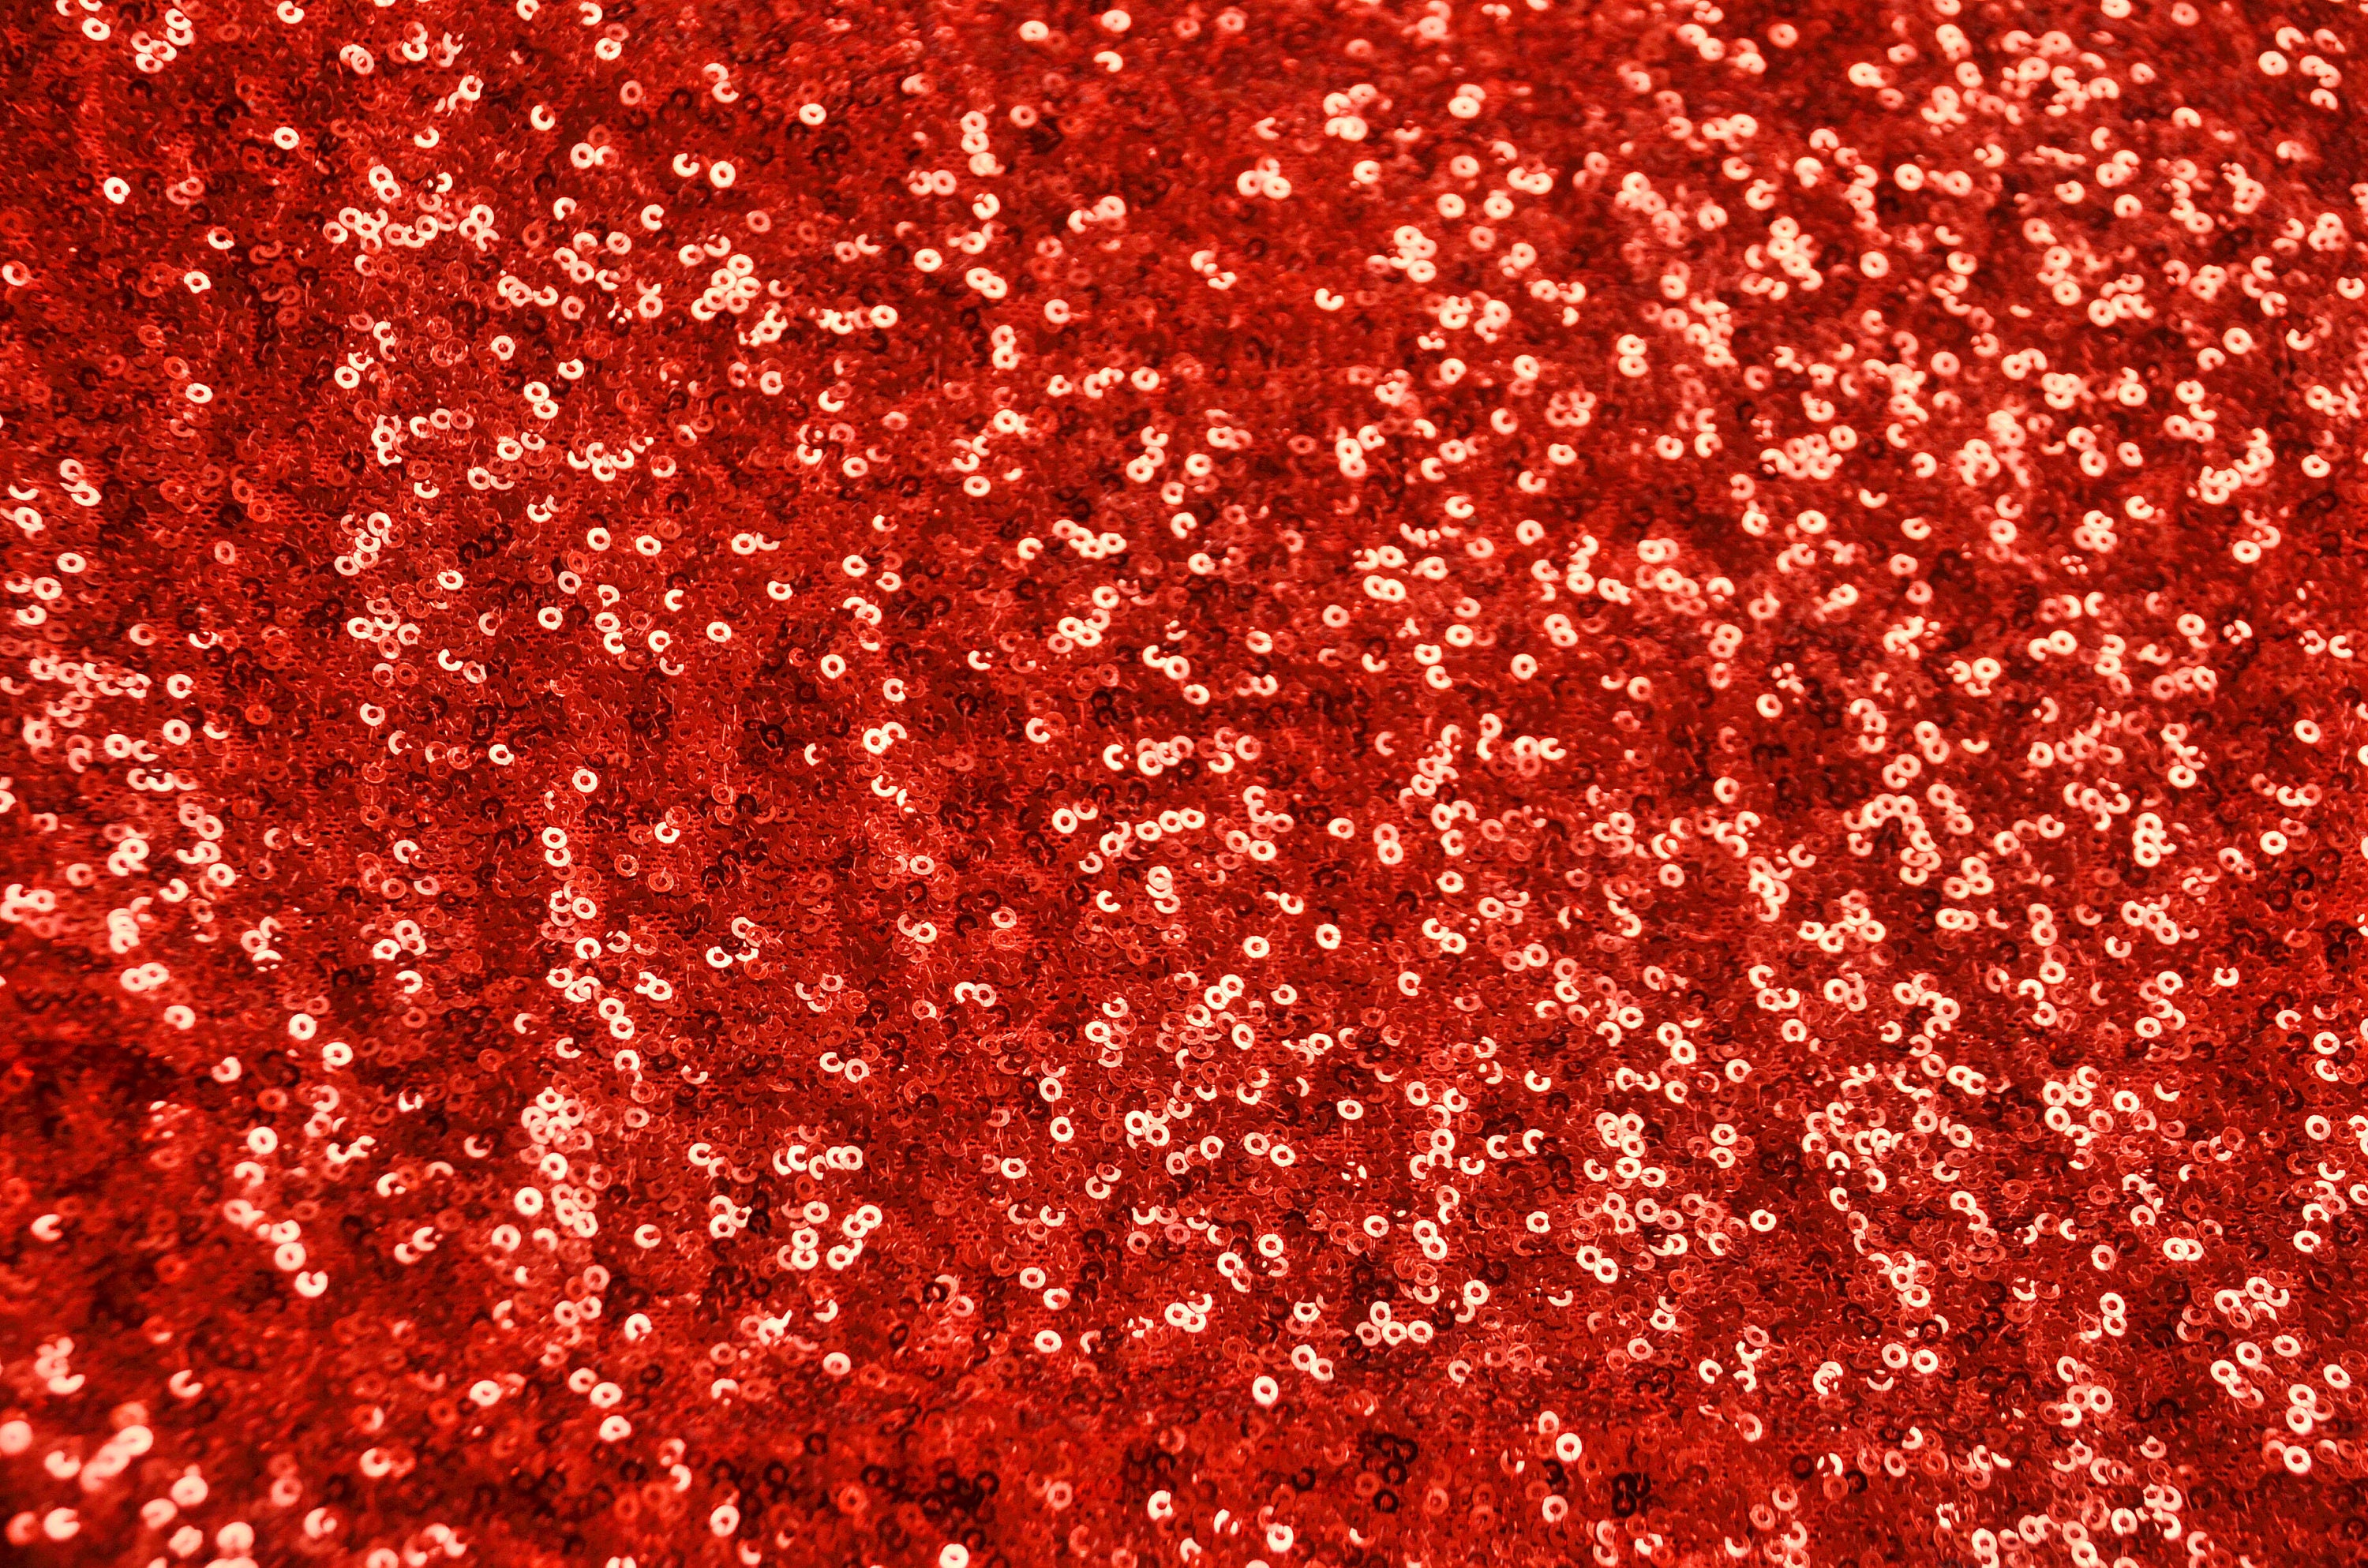 Red 3mm Glitz Sequins Fabric by the Yard Glitter Sequins | Etsy